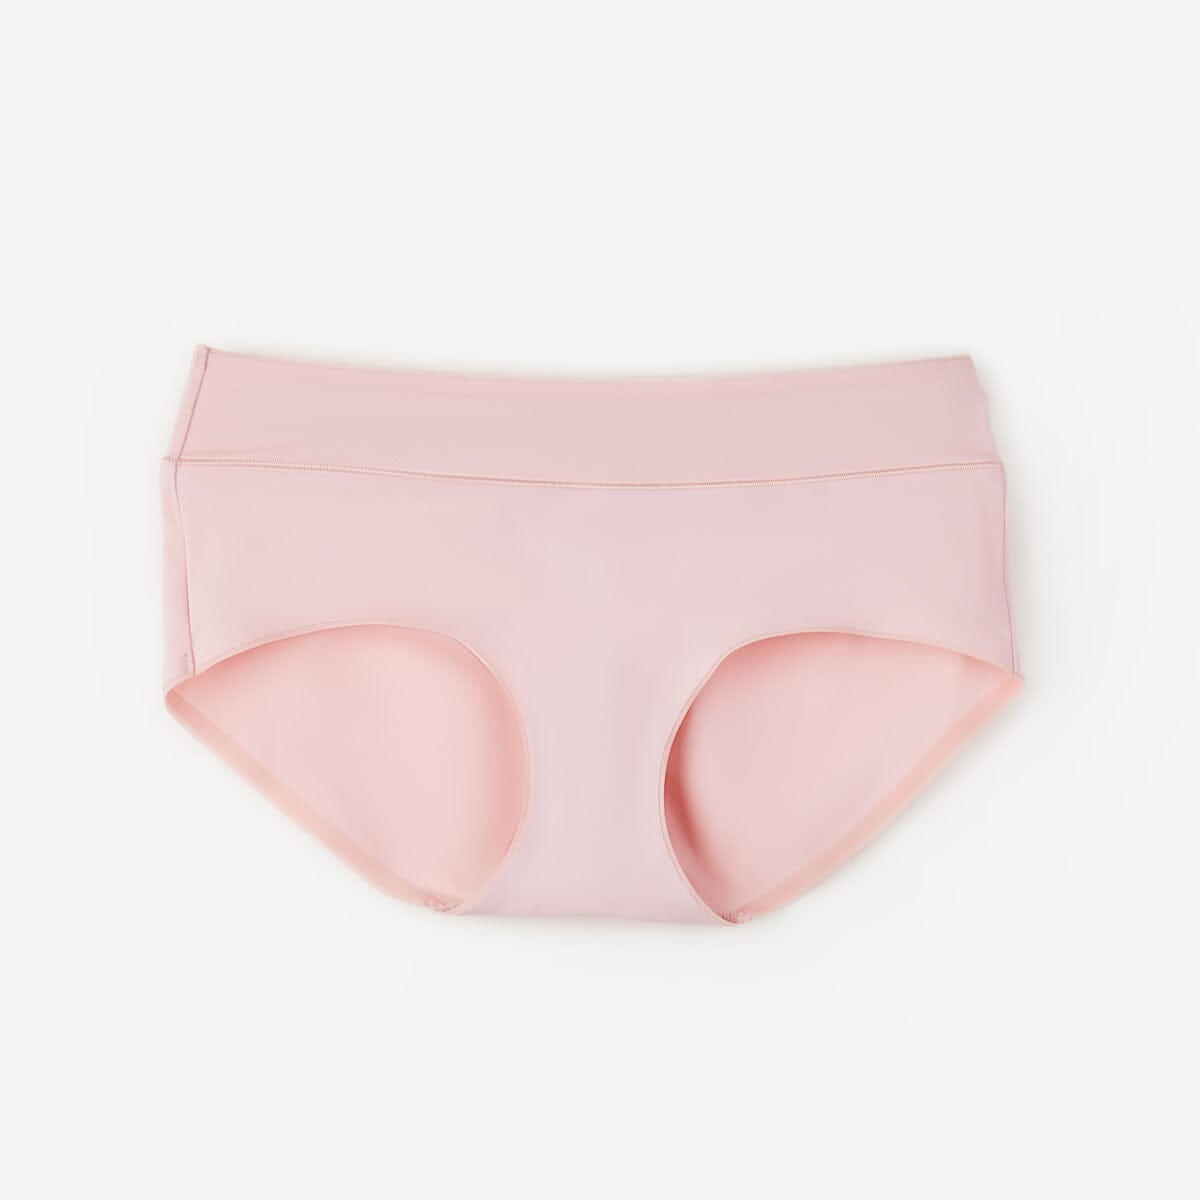 Signature Boyleg Panty Panty Her Own Words Cotton Candy S 